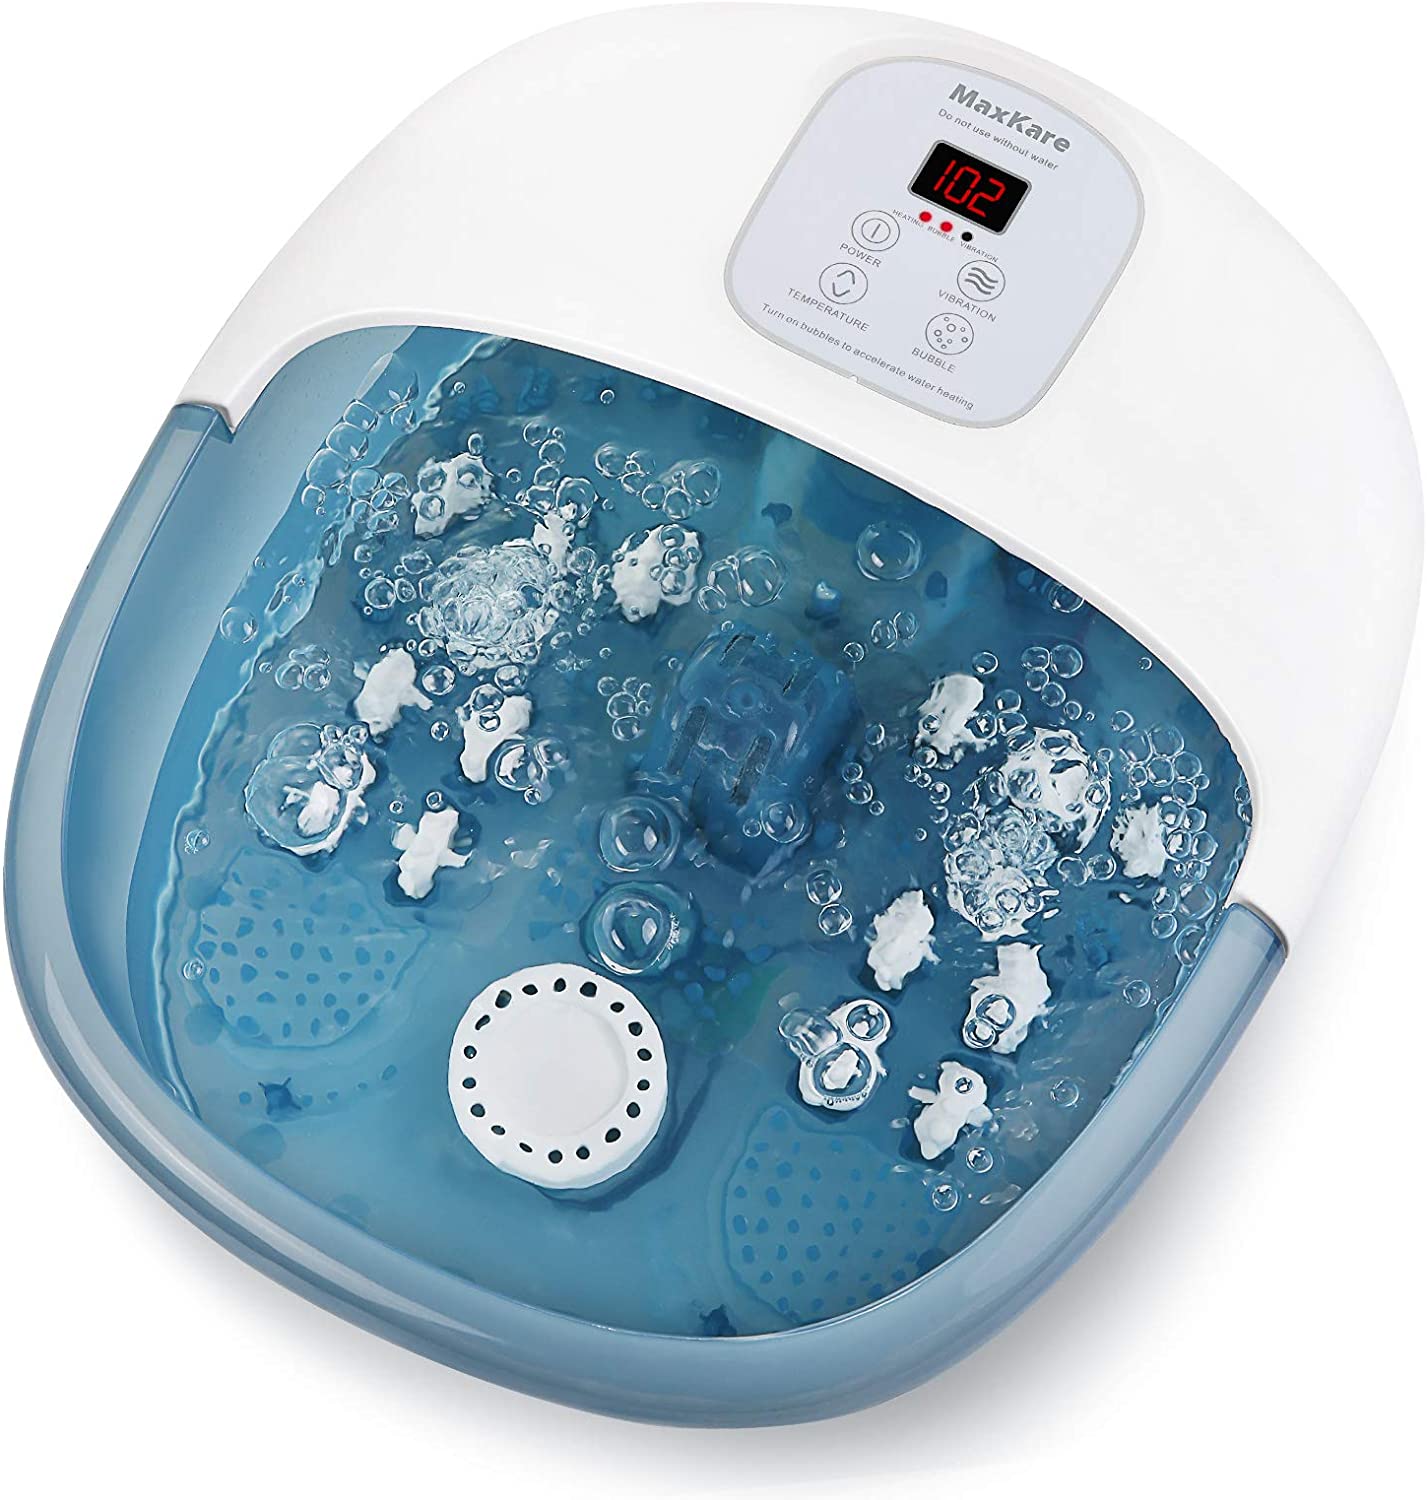 Load image into Gallery viewer, Foot Bath Massager with Heat Bubbles Vibration and 14 Massage Rollers, Foot Spa Basin Pedicure Soaking Feet with Adjustable Temperature and Auto Shut-Off, Comfortable Relax Home Spa Experience - NAIPO
